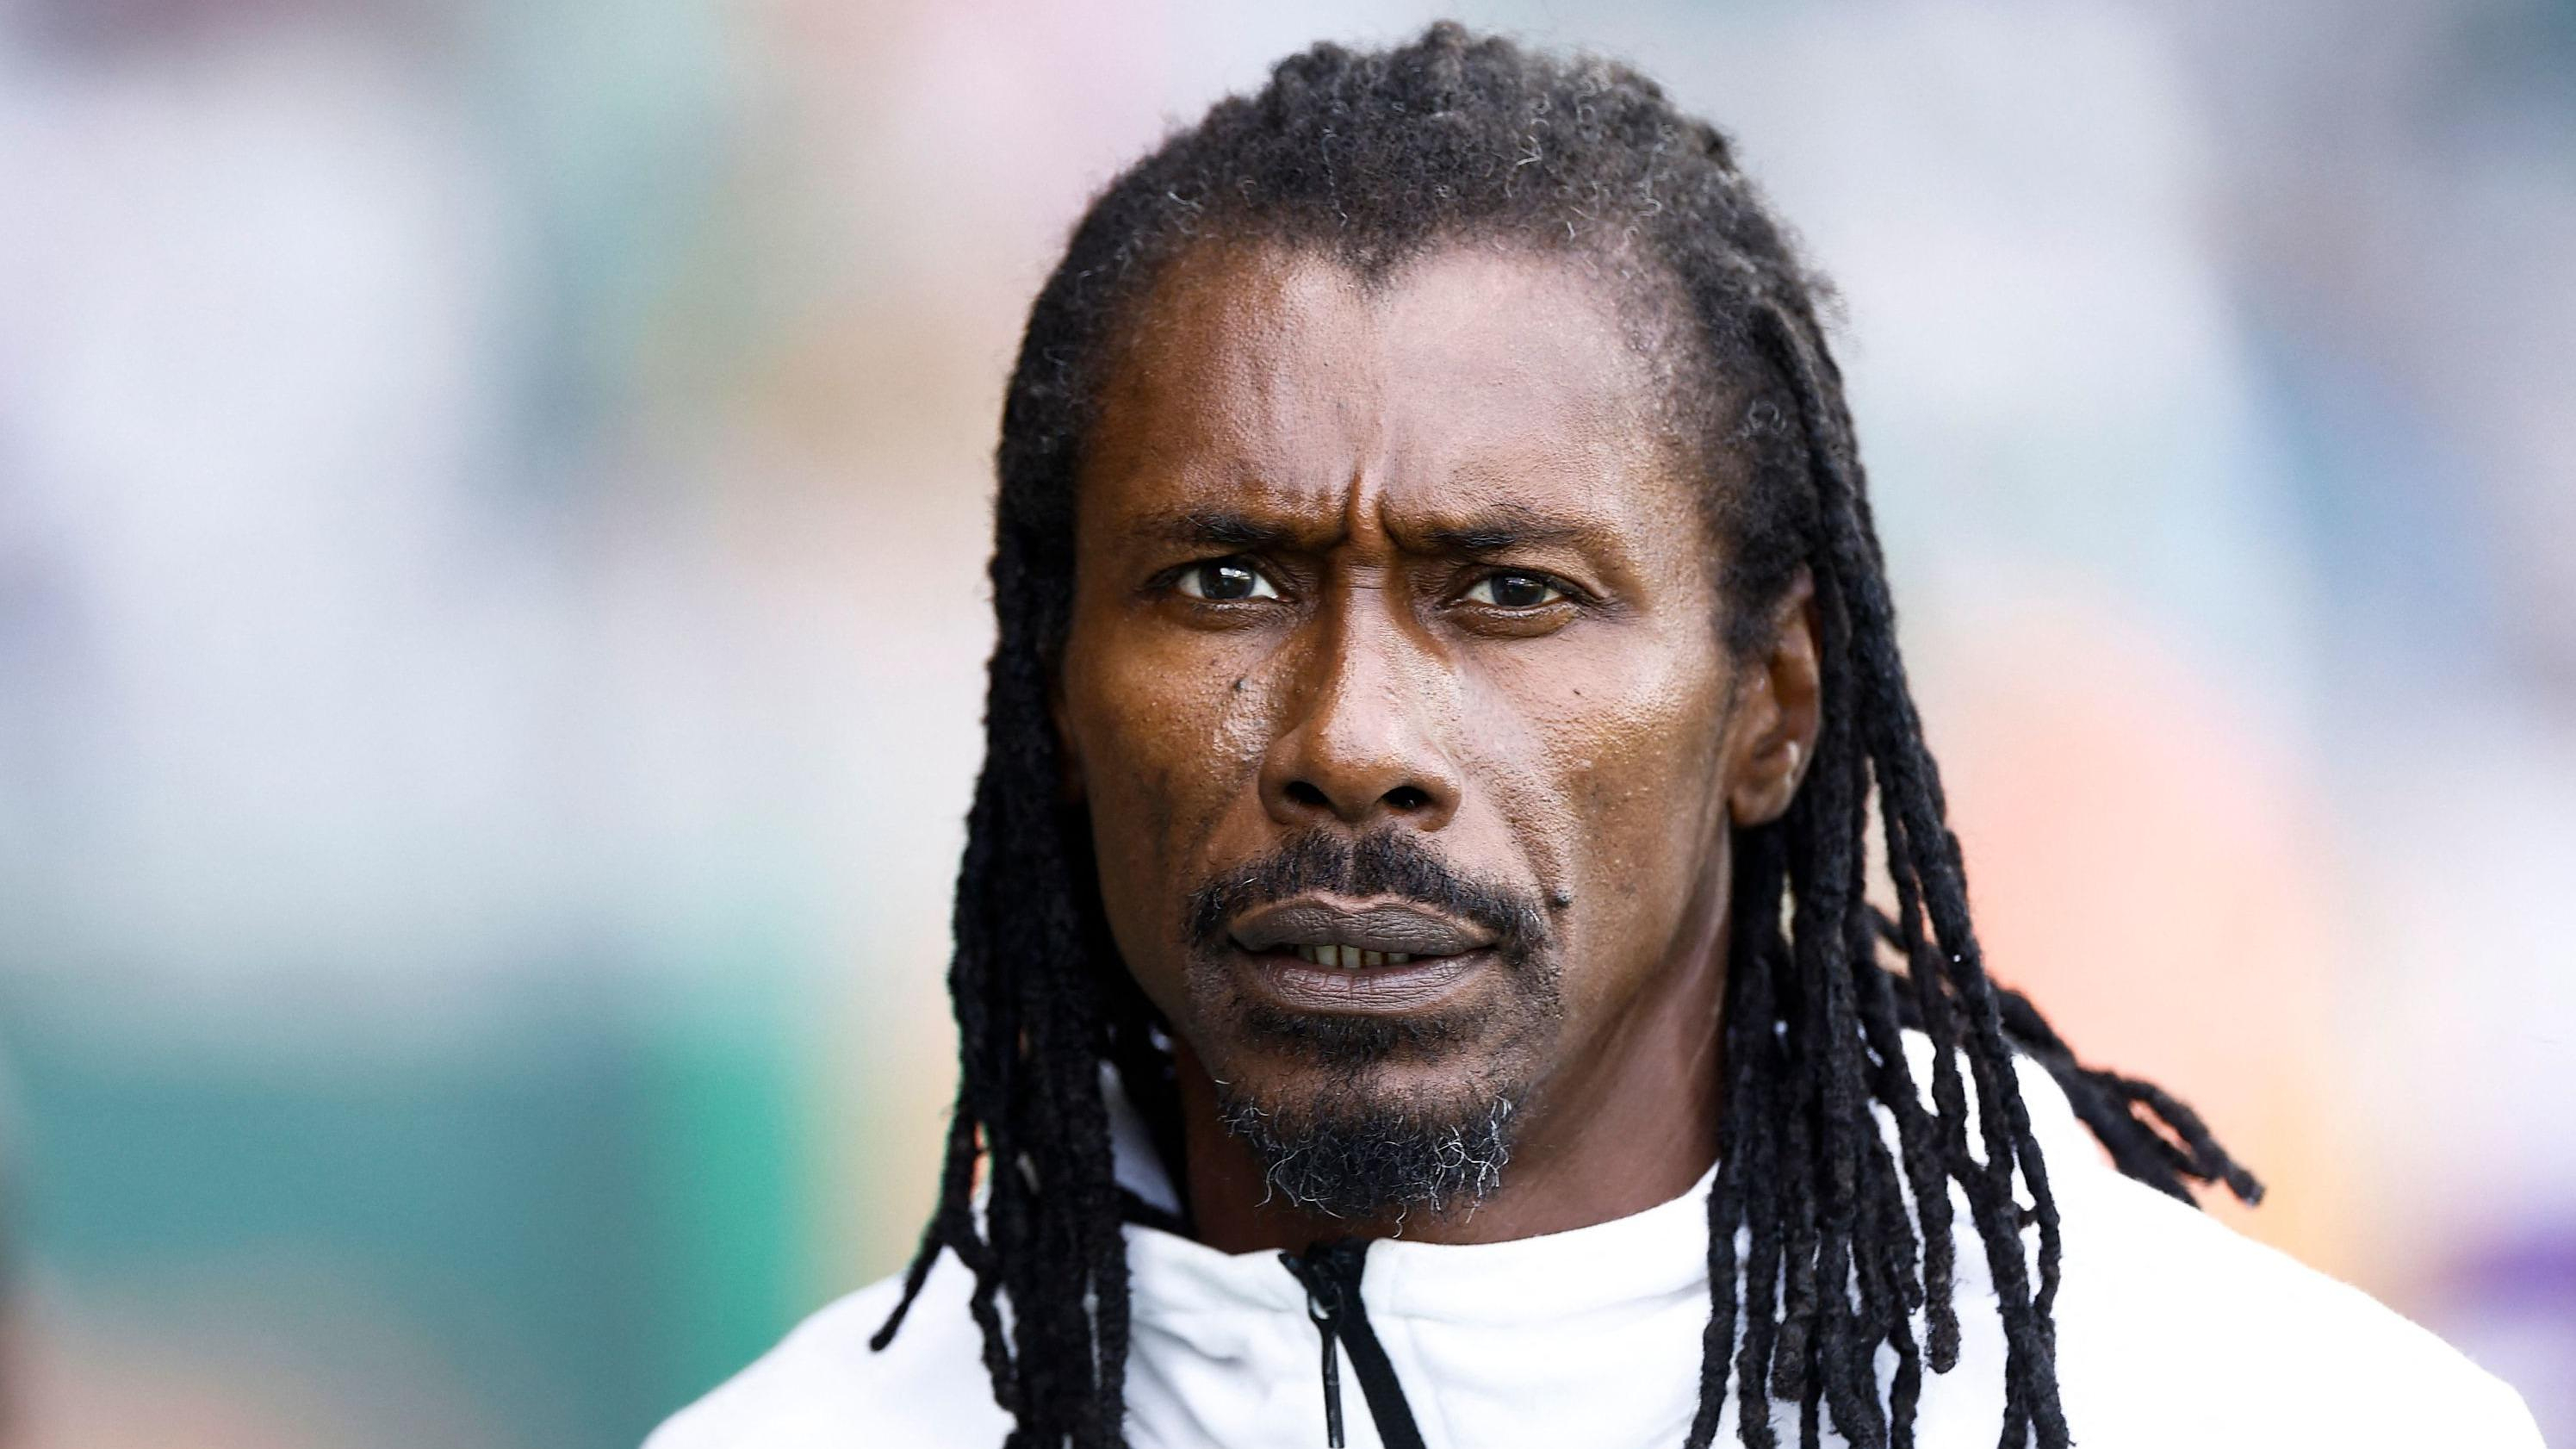 CAN: “I feel very good”, Senegal coach Aliou Cissé reassures after his night in hospital